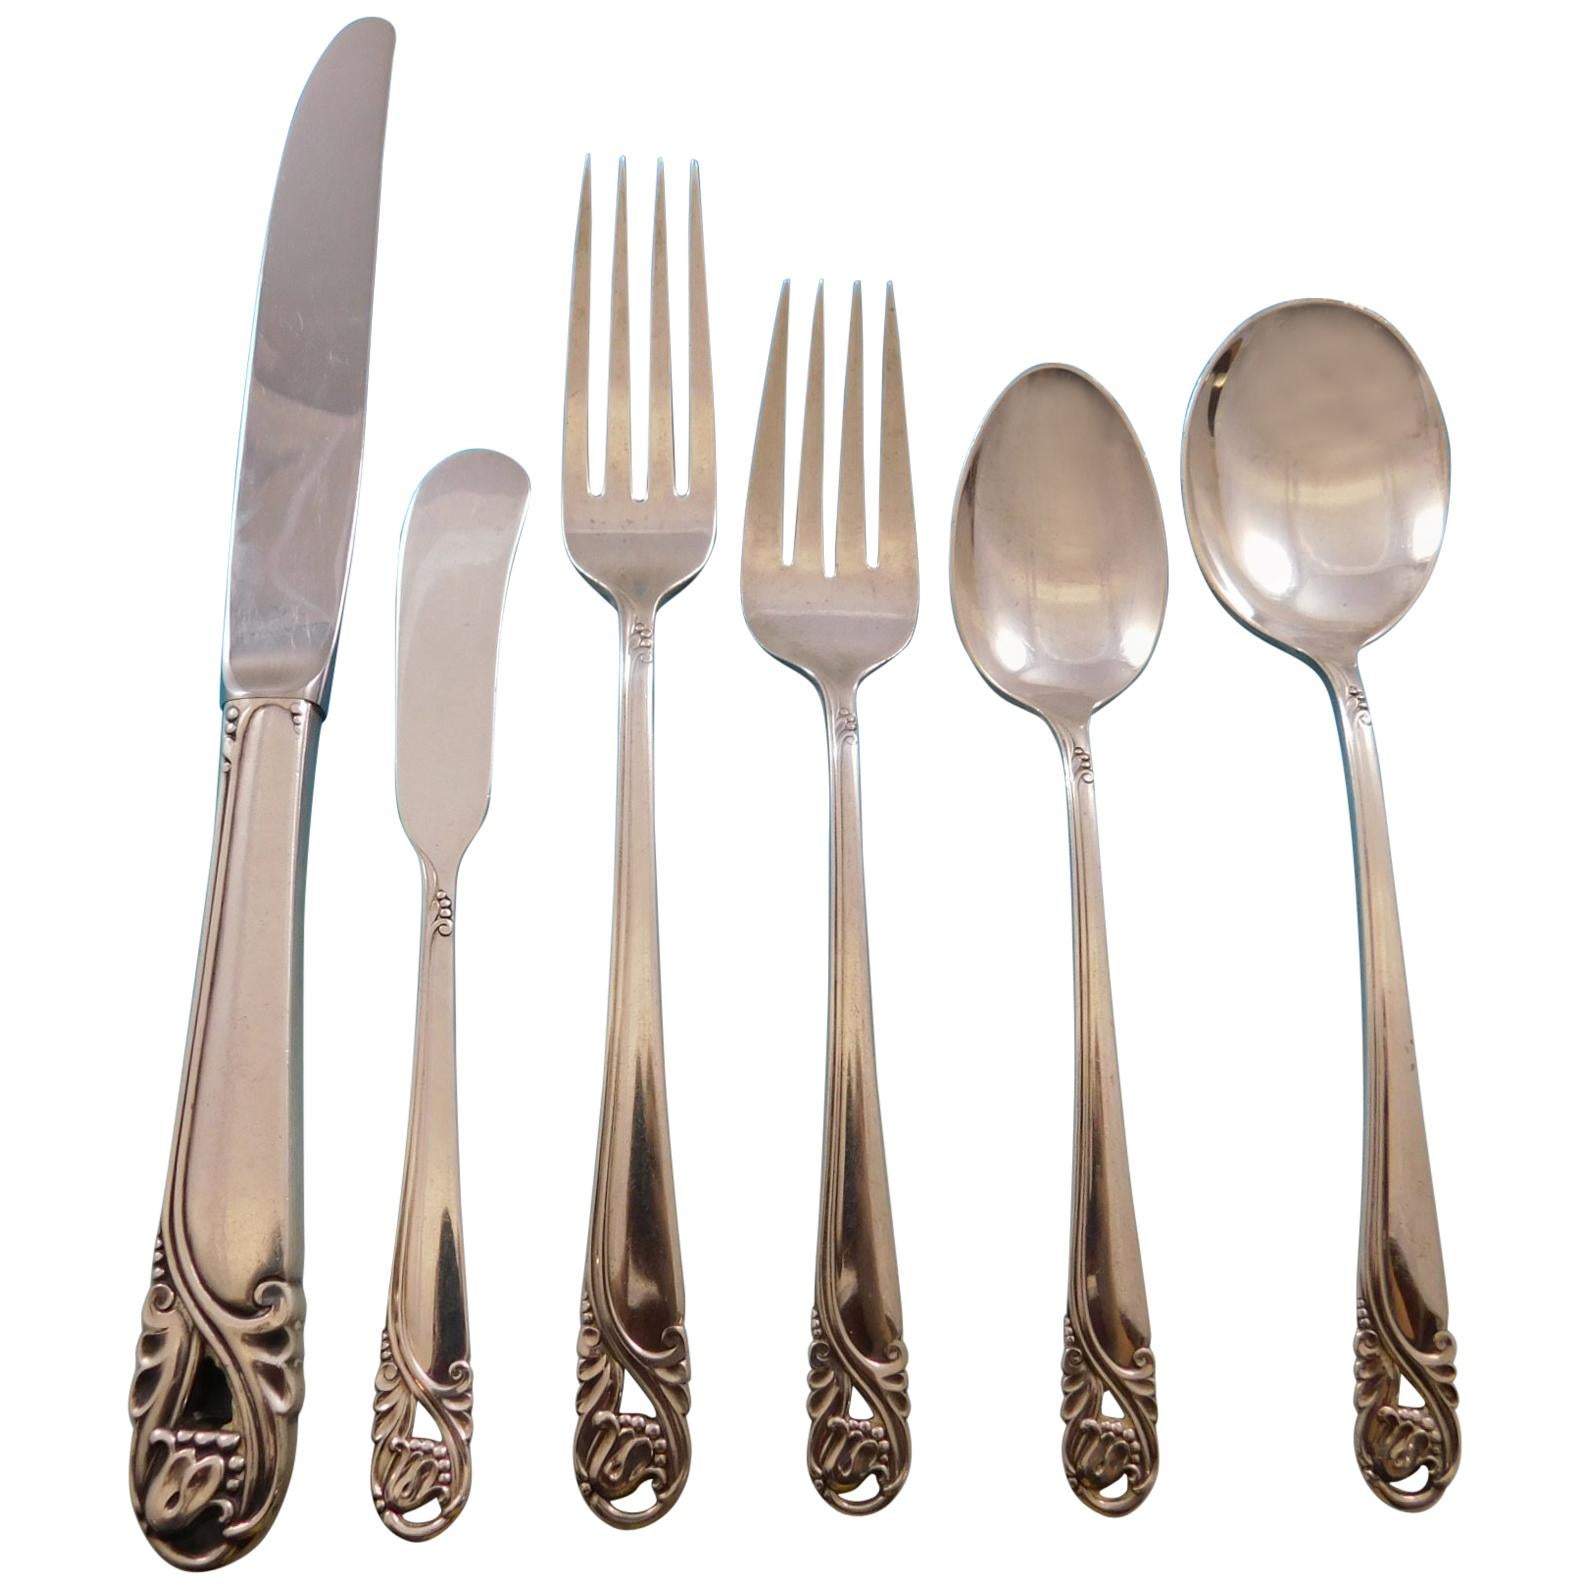 Spring Glory by International Sterling Silver Flatware 8 Service Set 52 Pieces